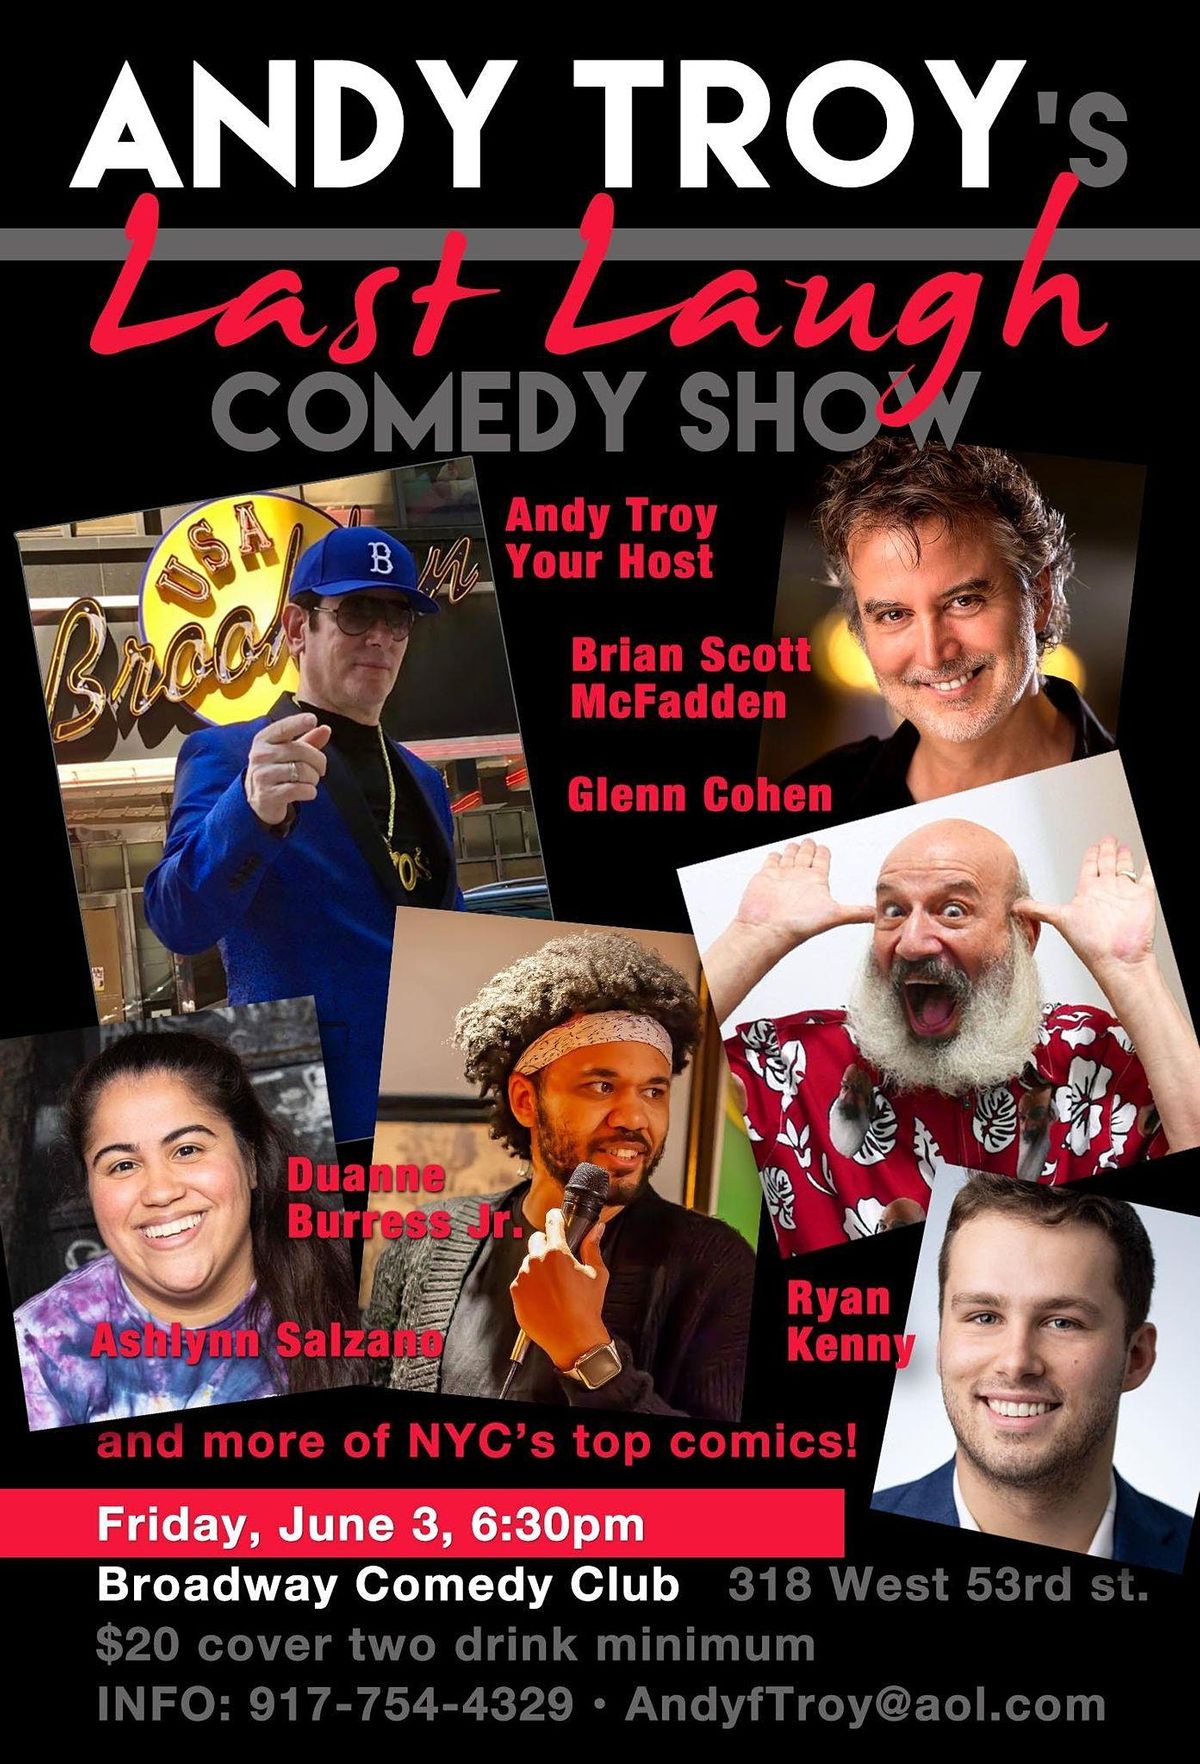 Andy Troy's Last Laugh Comedy Show! Just $20 With Discount Code ANDYTROY